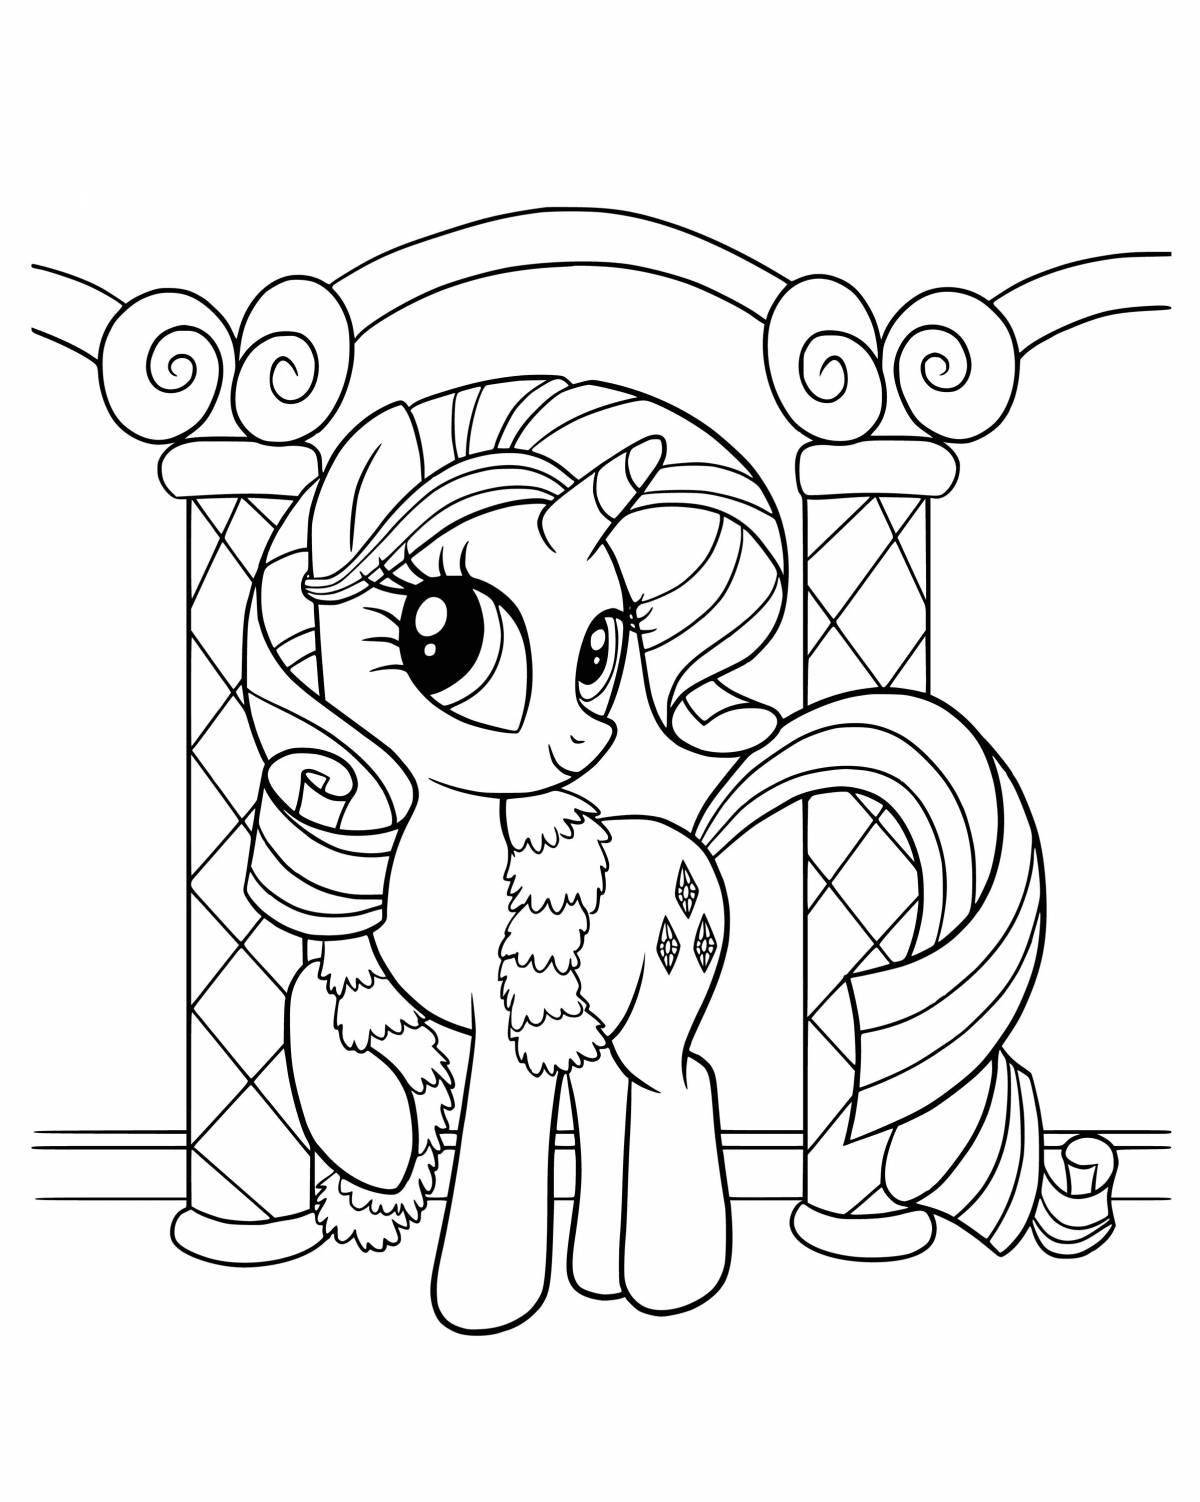 My little pony's wonderful rarity coloring book